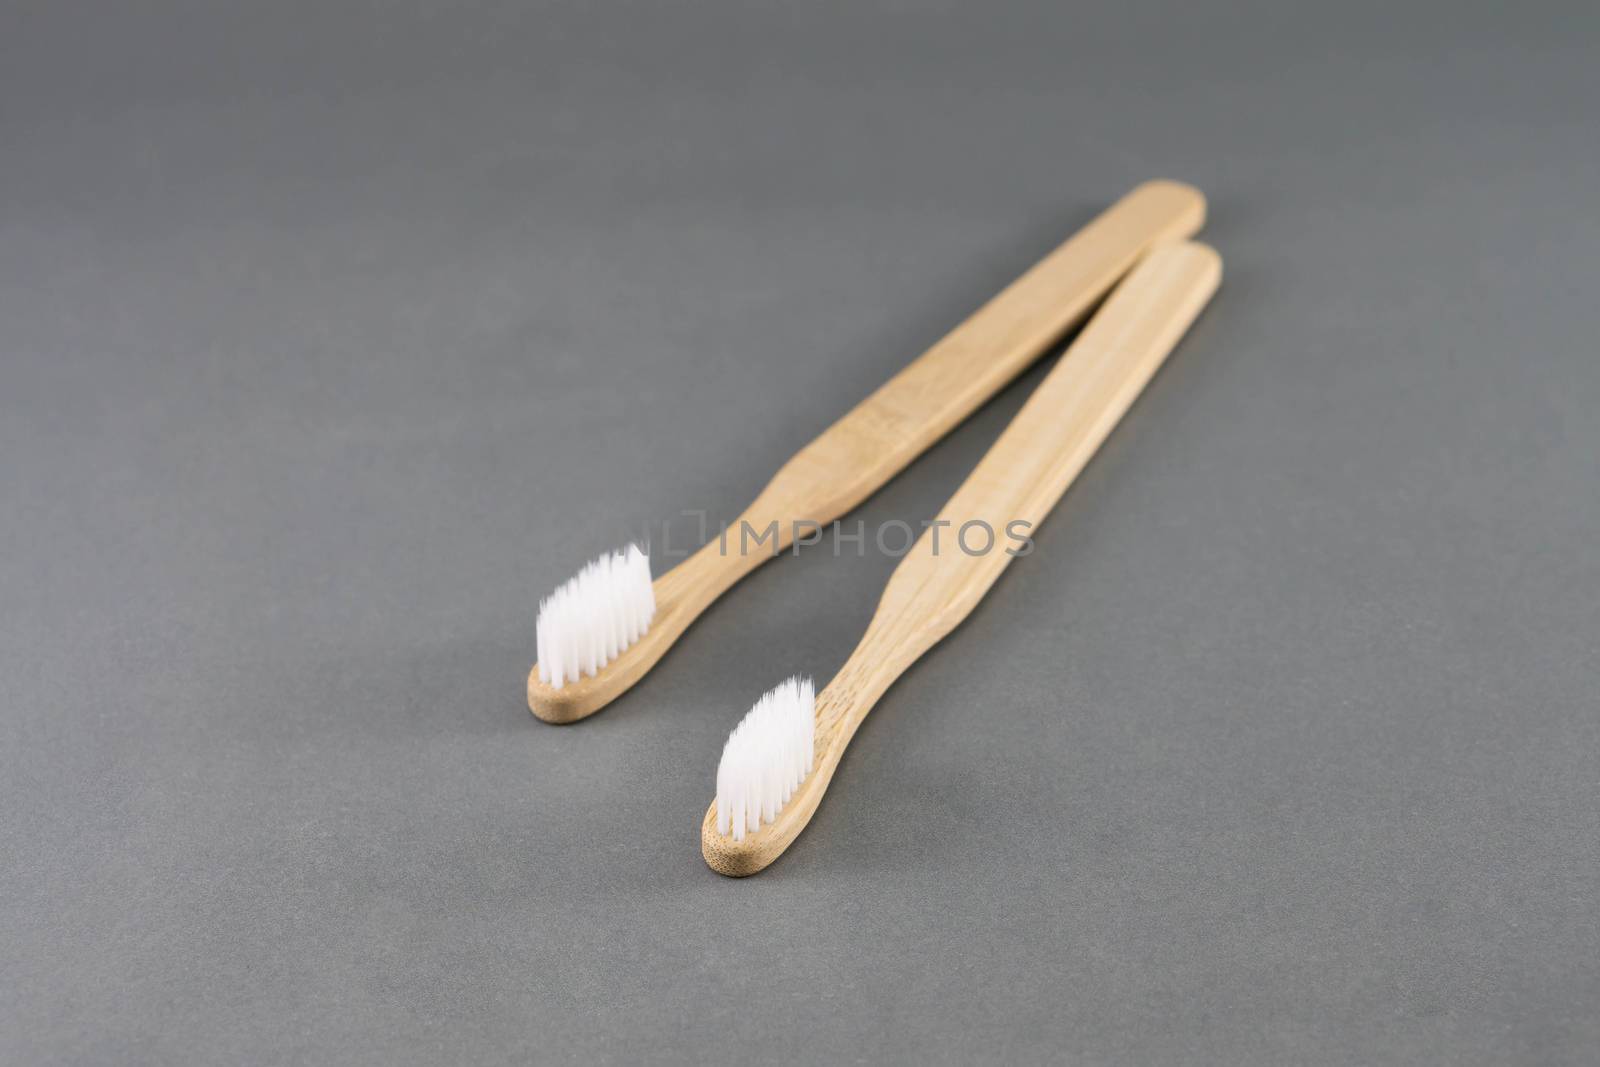 GClose up wooden toothbrush on grey background, selective focus by pt.pongsak@gmail.com